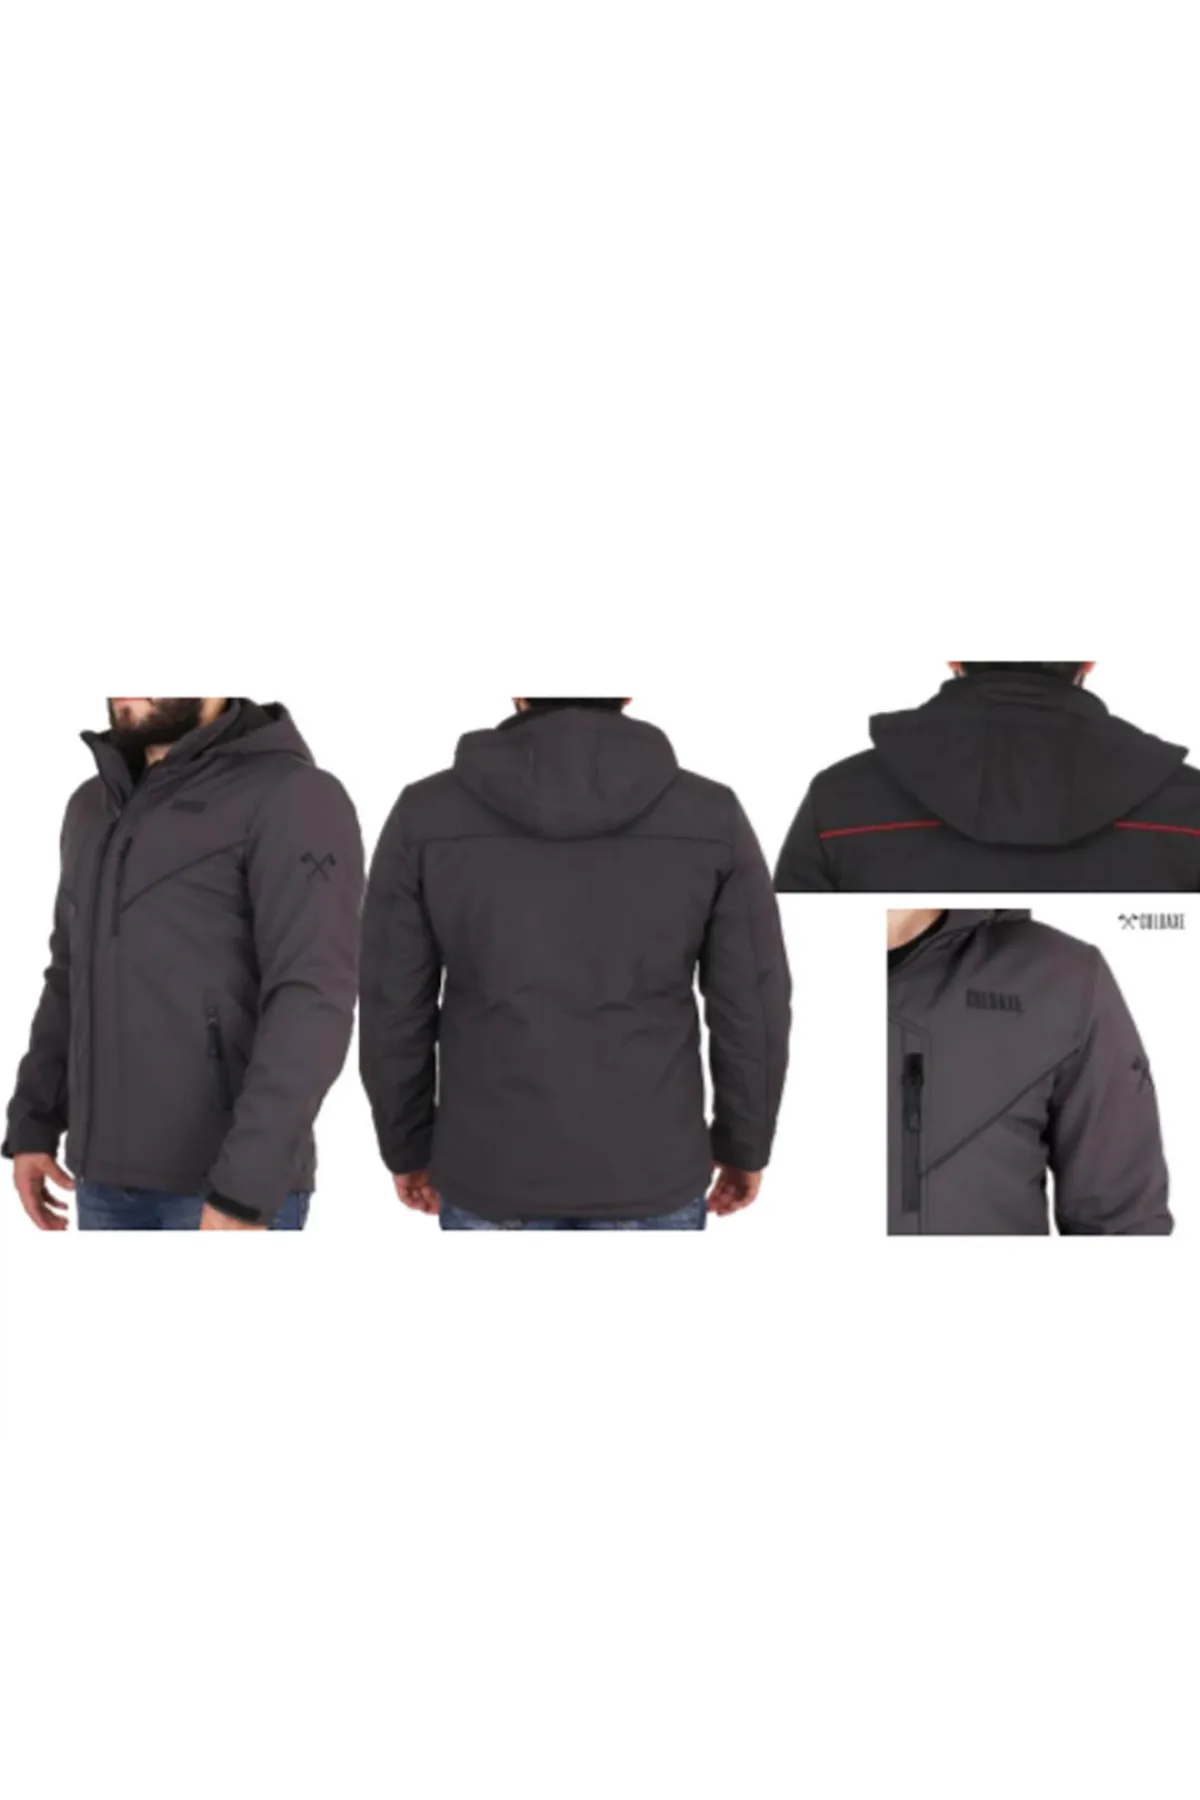 COLDAXE SOFT SHELL STORM (ANTRASİT)